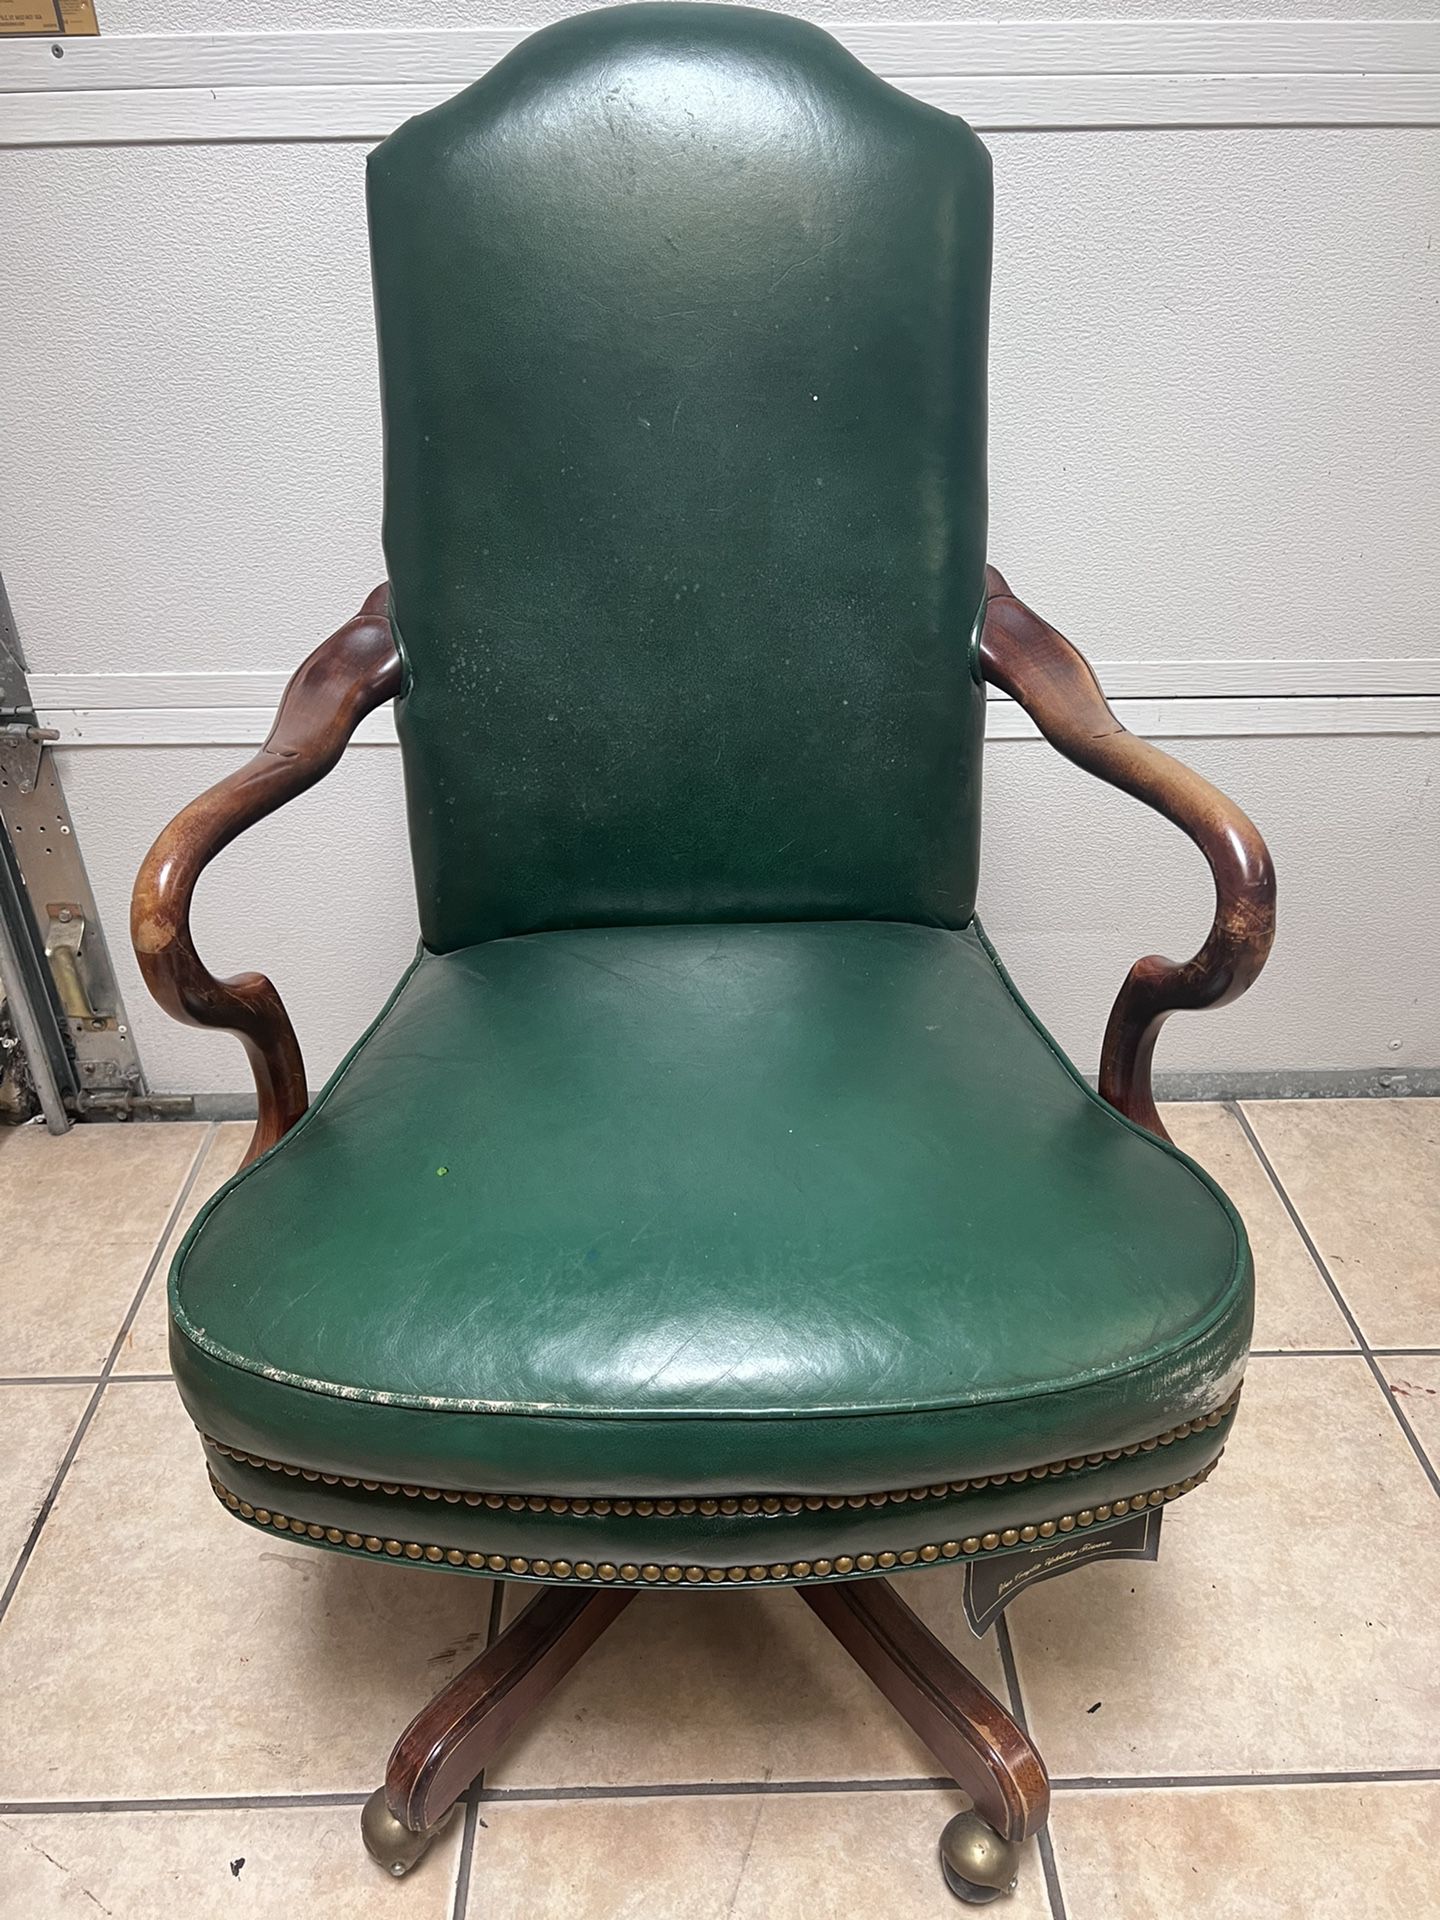 FREE Woodmark Antique Office Chair